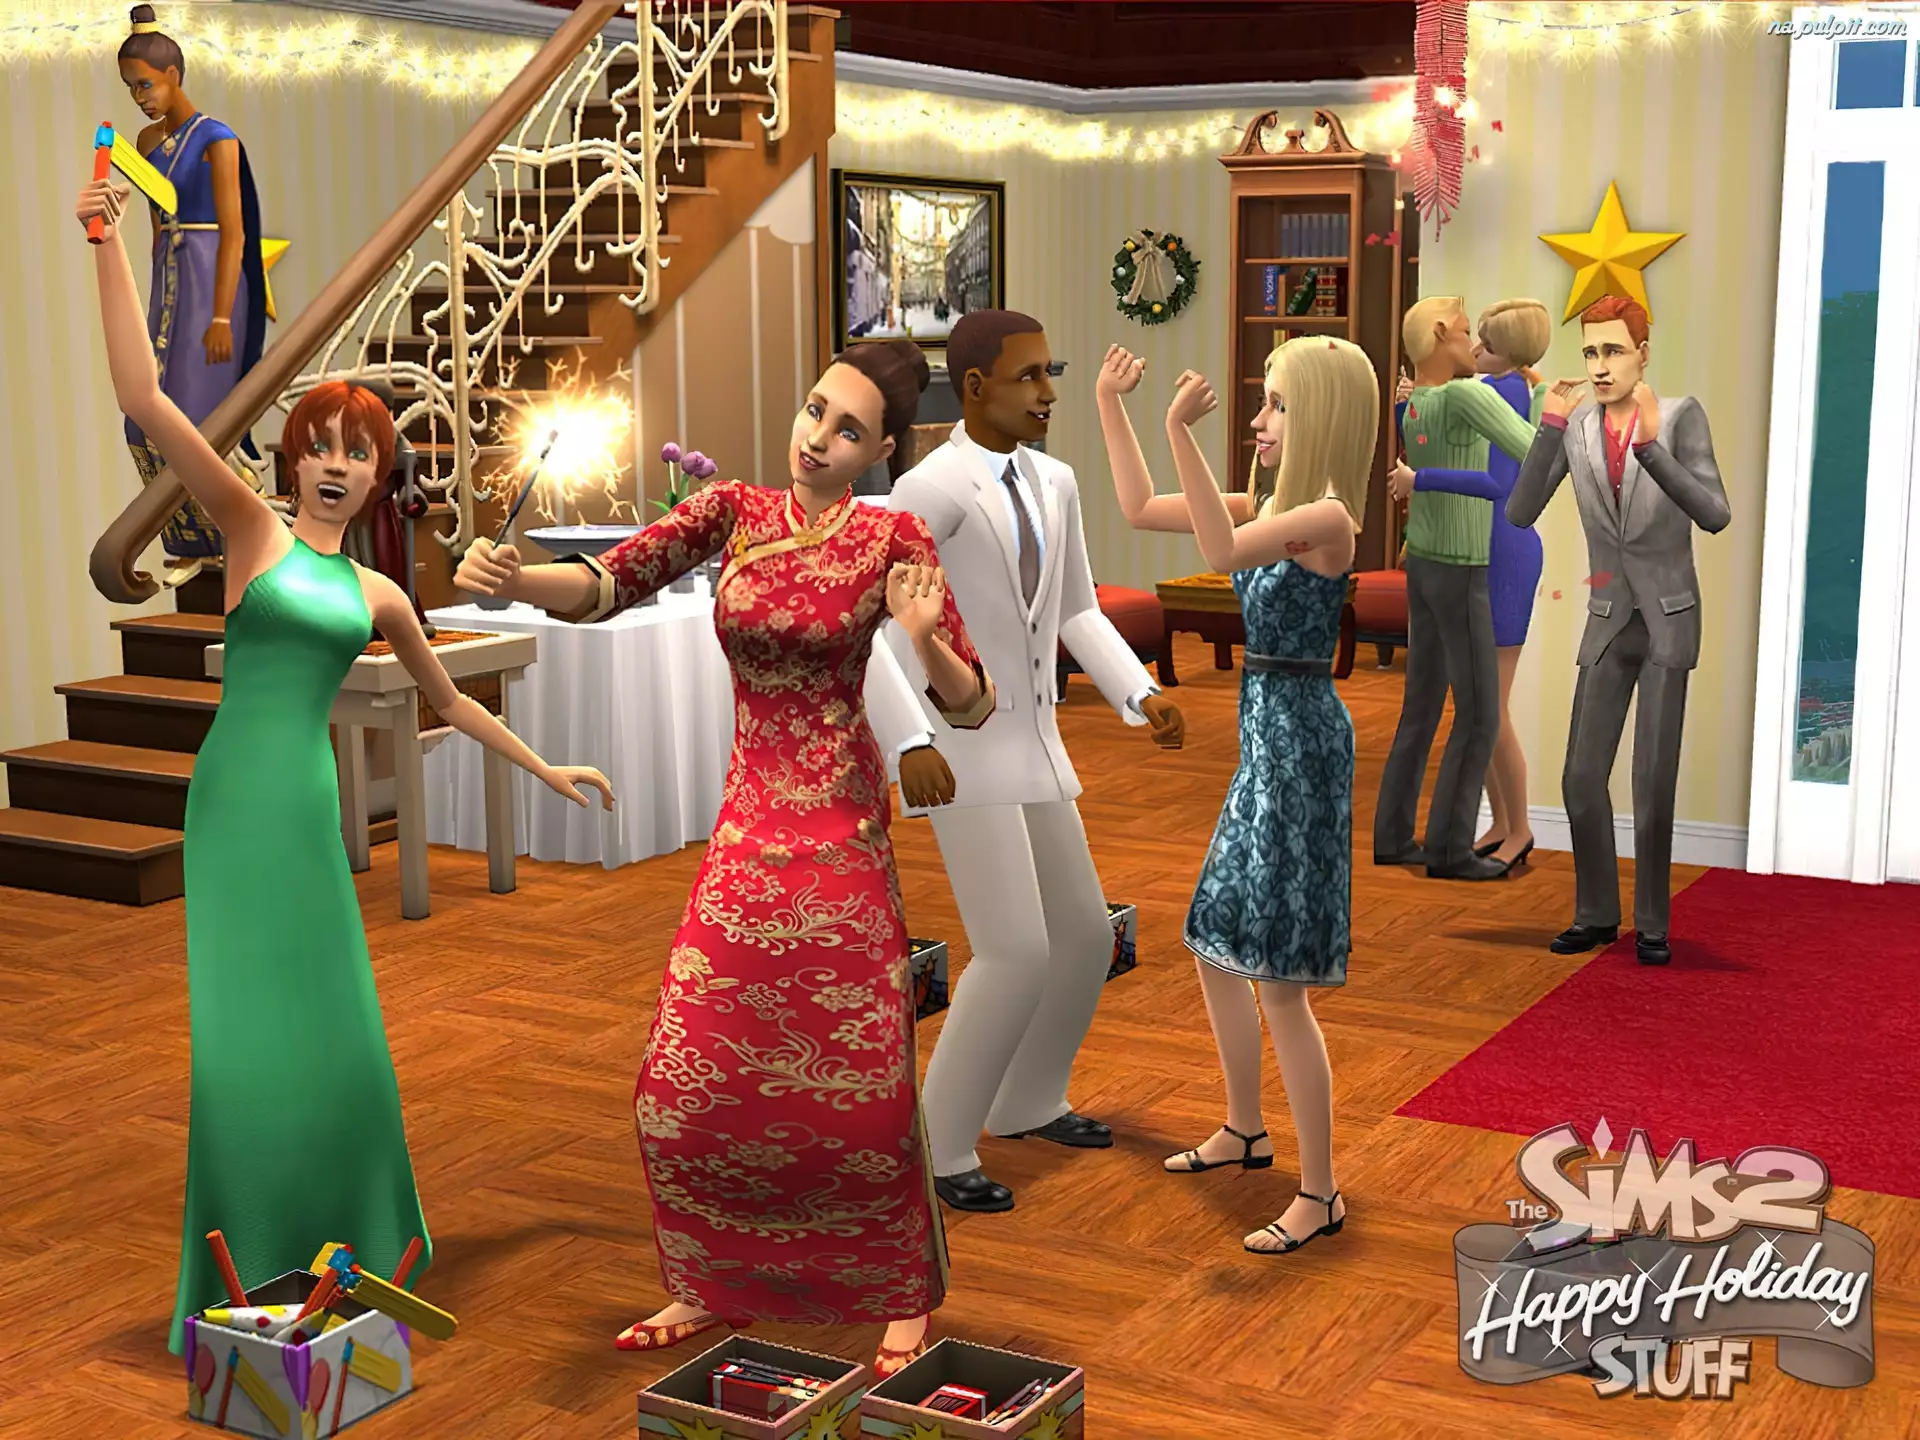 Happy Holiday, The Sims 2